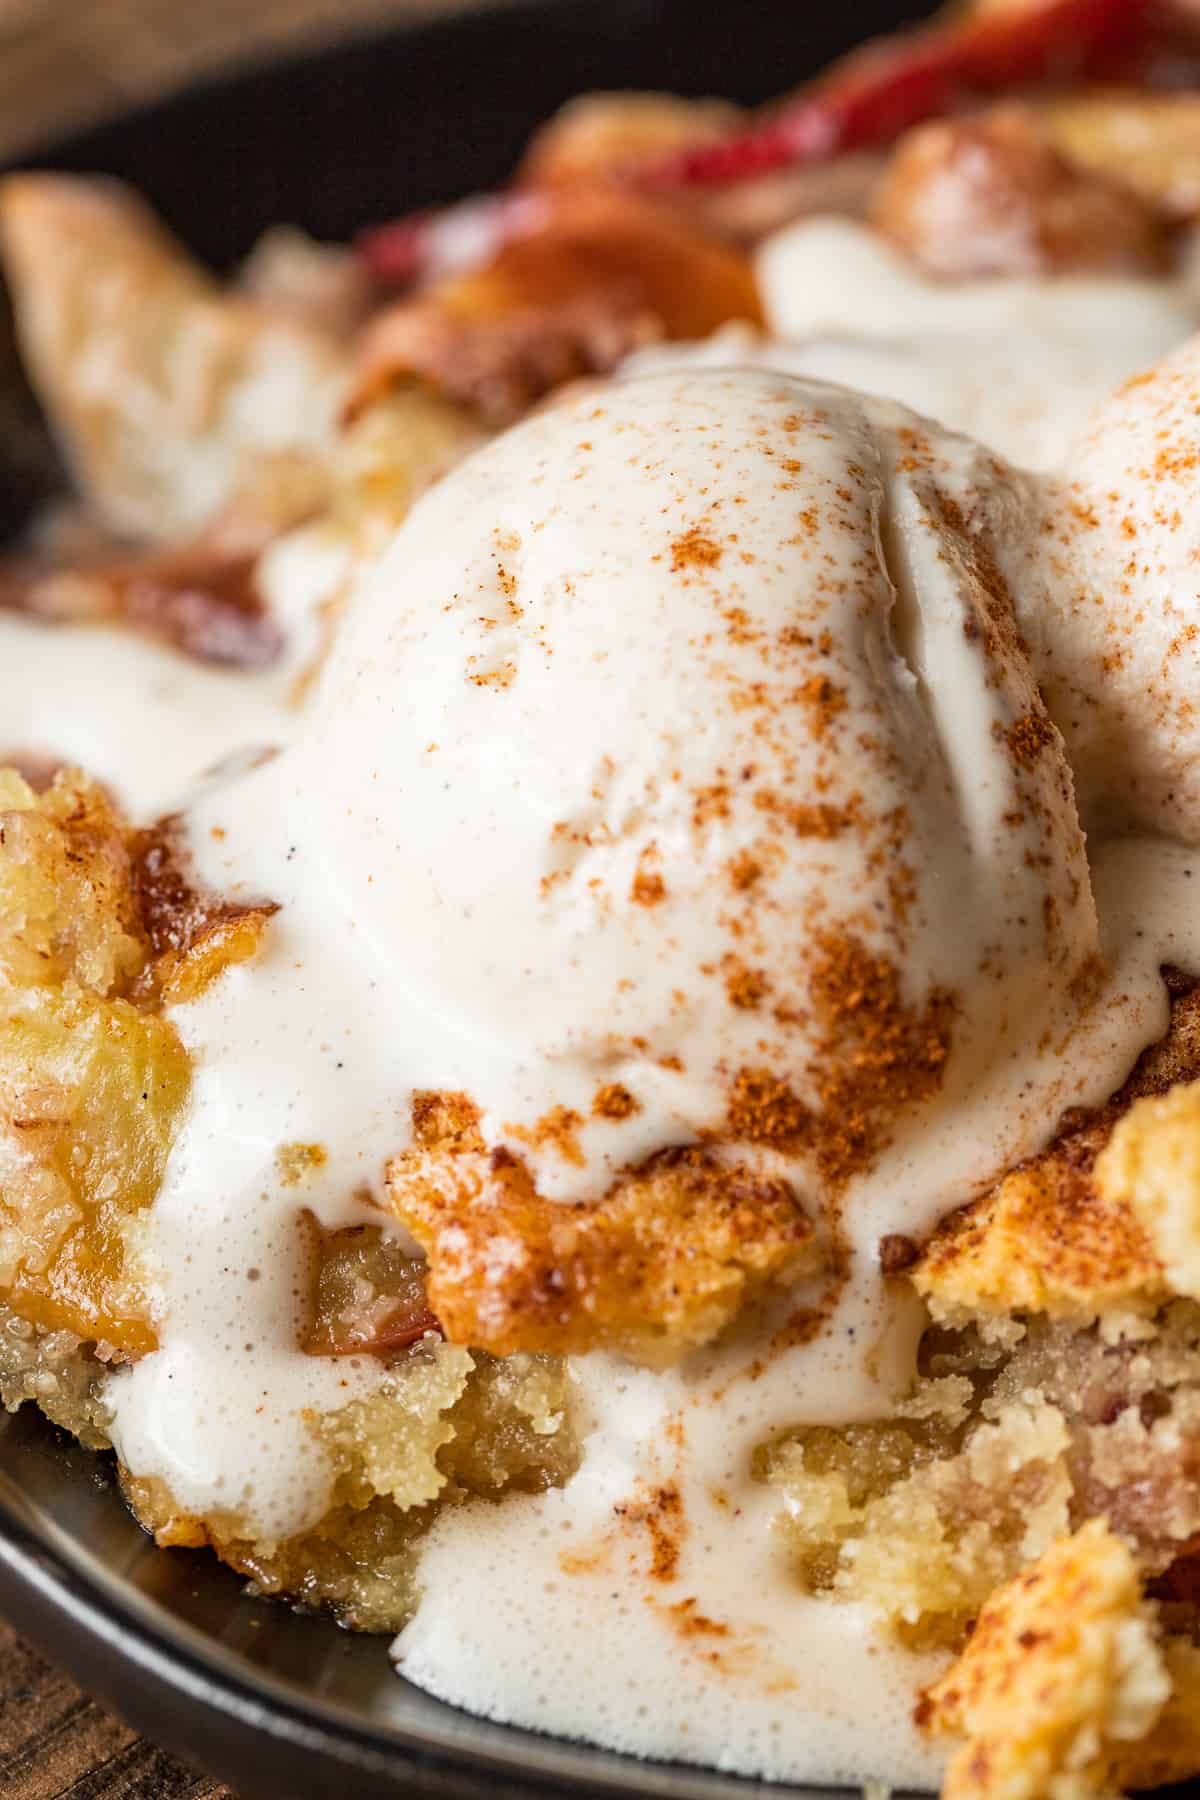 Peach cobbler in a cast iron skillet topped with a scoop of melting ice cream and cinnamon.